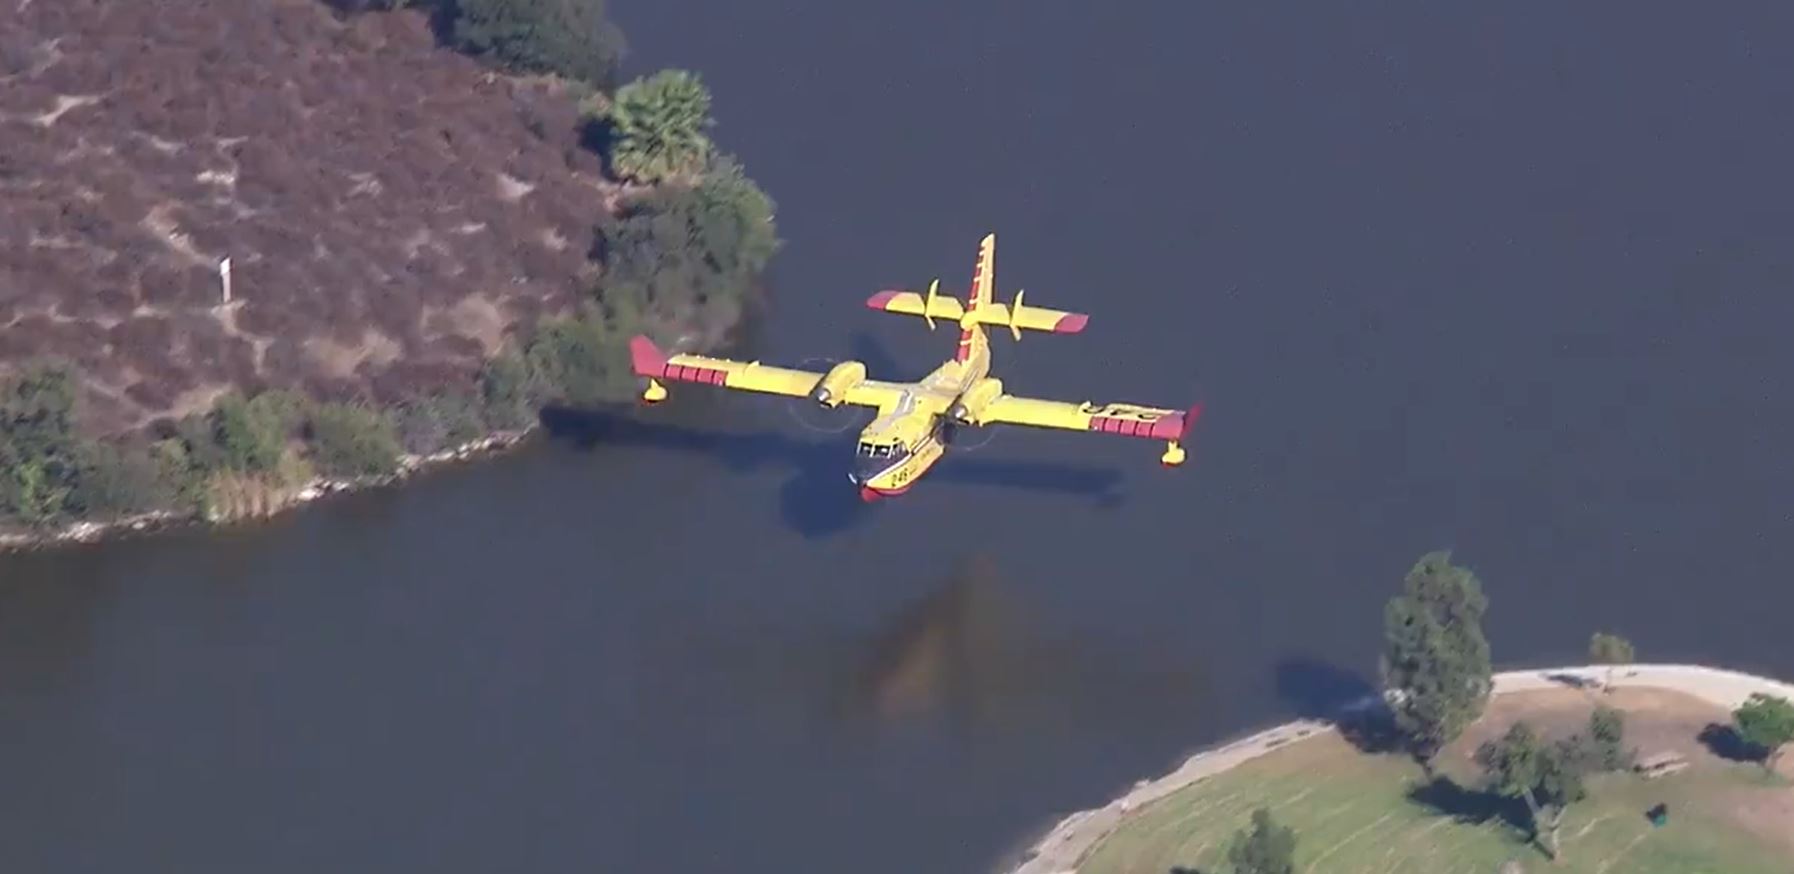 The epic piloting of this water-bomber plane has drawn world wide attention